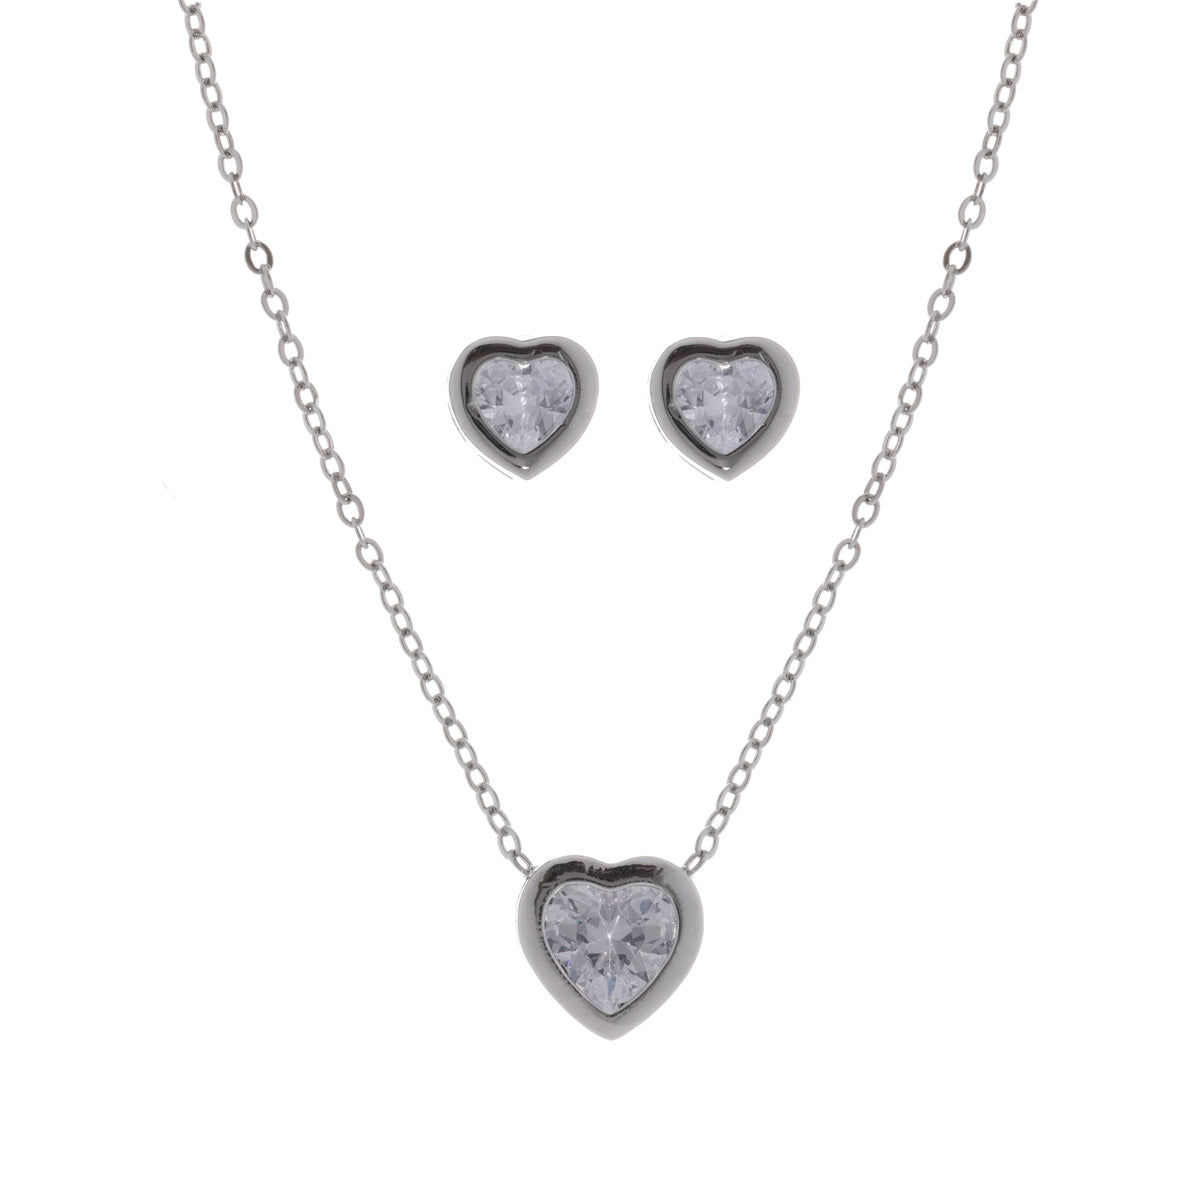 Heart necklace and earrings set in a gift box